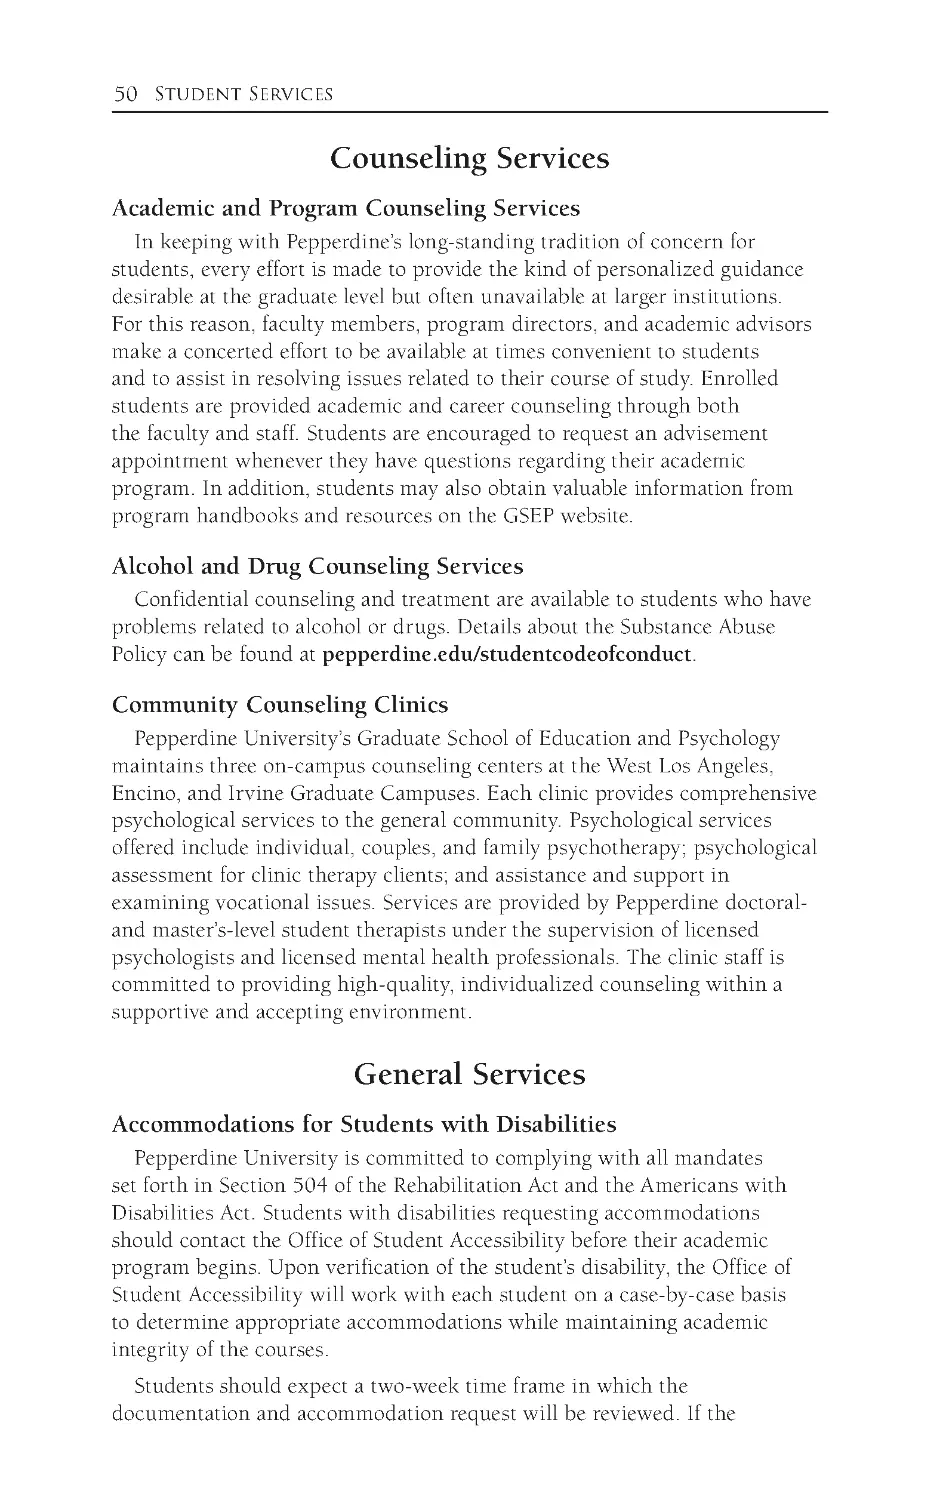 Alcohol and Drug Counseling Services
Community Counseling Clinics
General Services